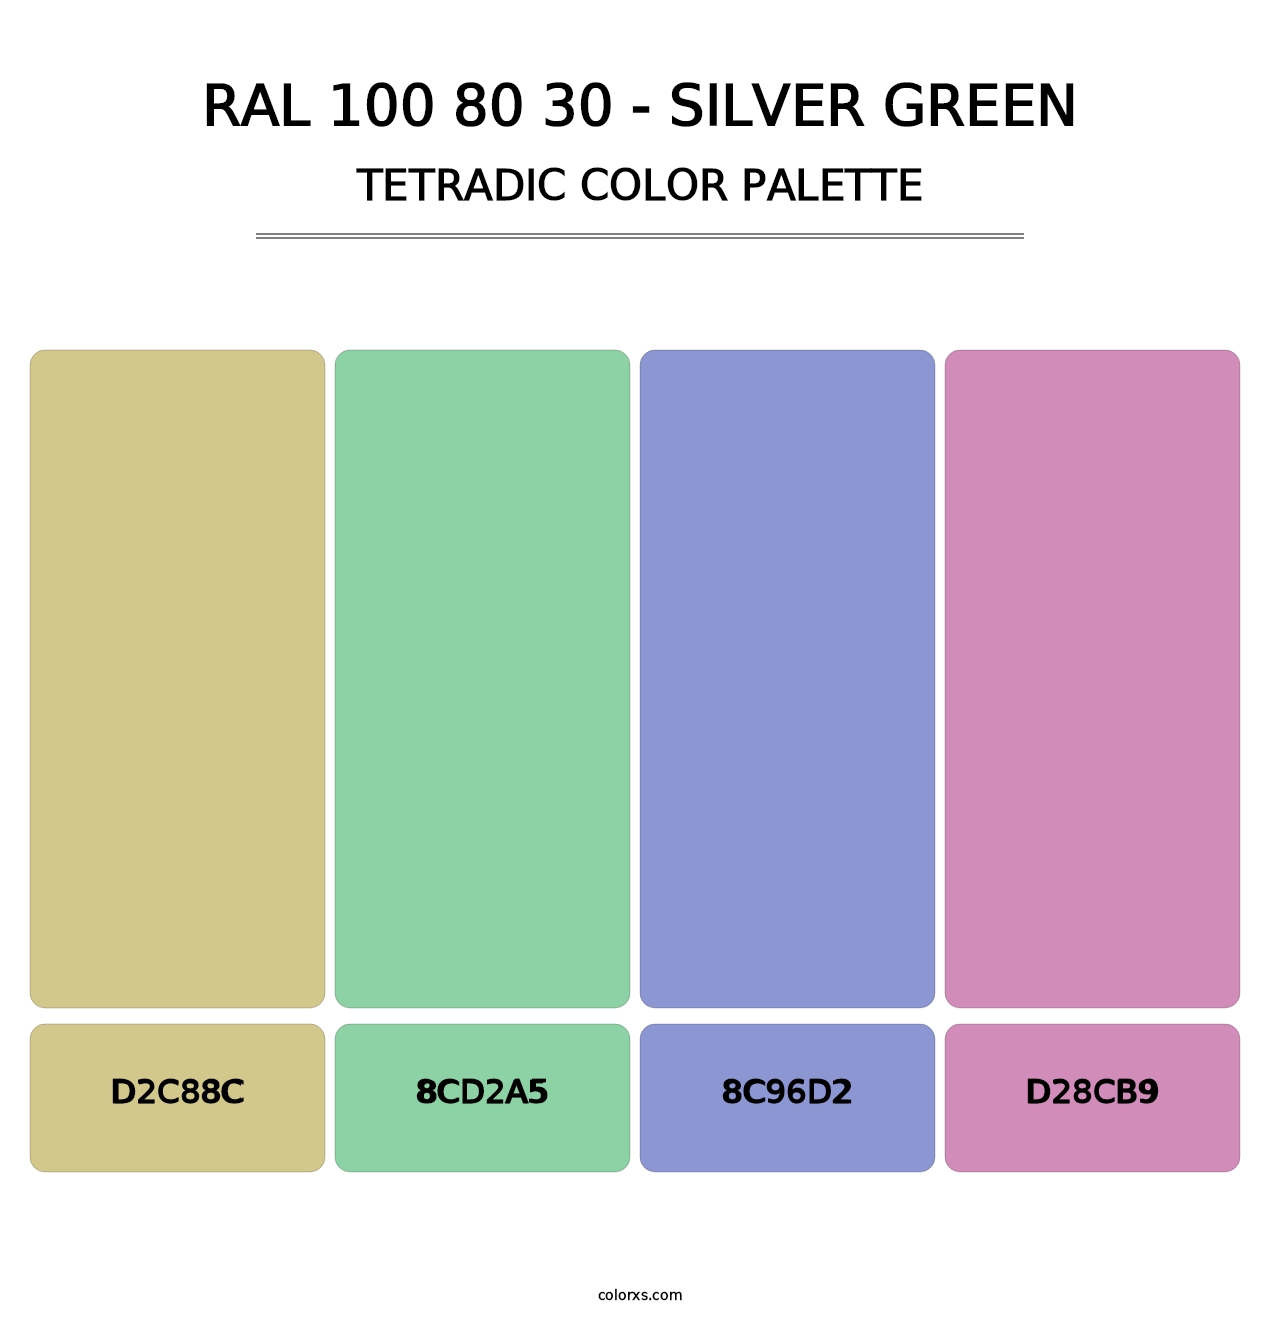 RAL 100 80 30 - Silver Green - Tetradic Color Palette